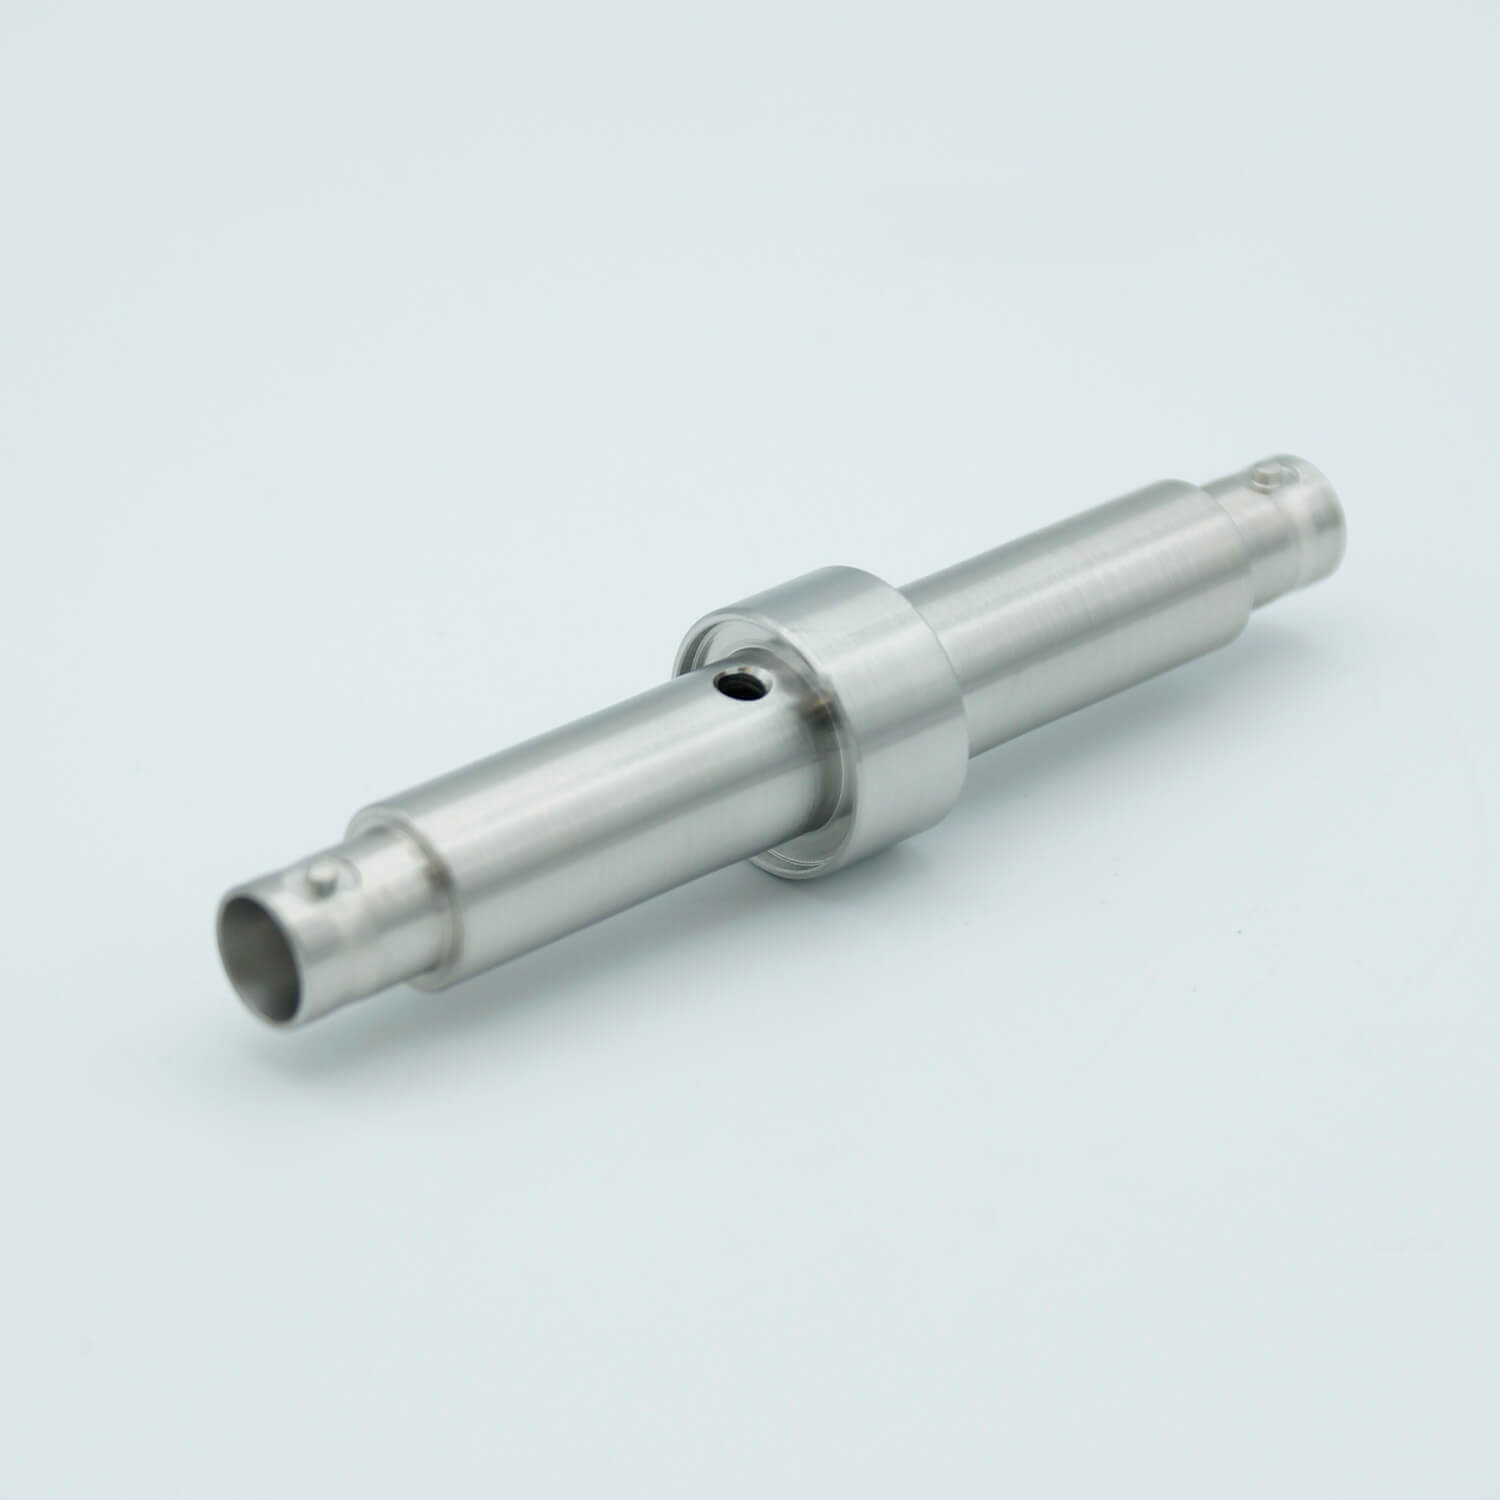 MHV Coaxial Feedthrough, 1 Pin, Grounded Shield, Double-Ended, 0.745 ...